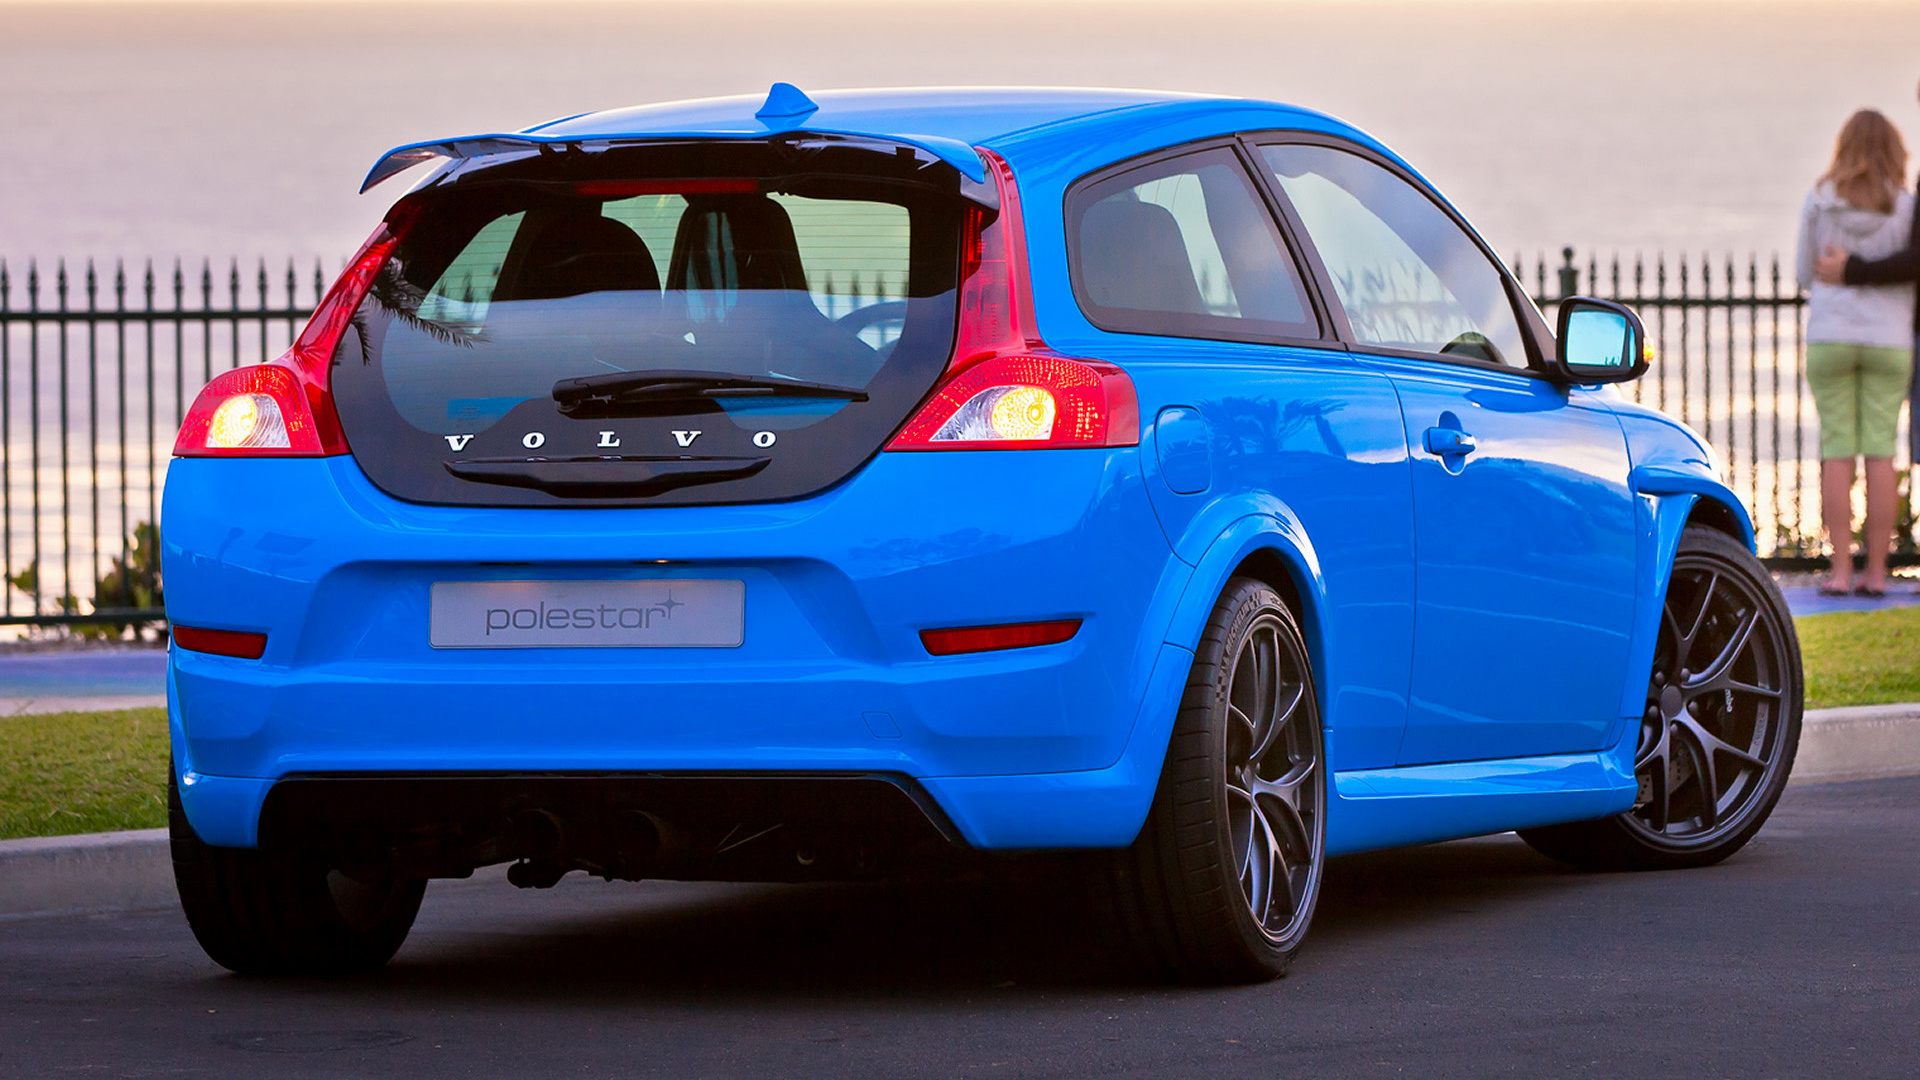 Volvo C30 Polestar Performance Concept 2010 Wallpapers And Hd Images 